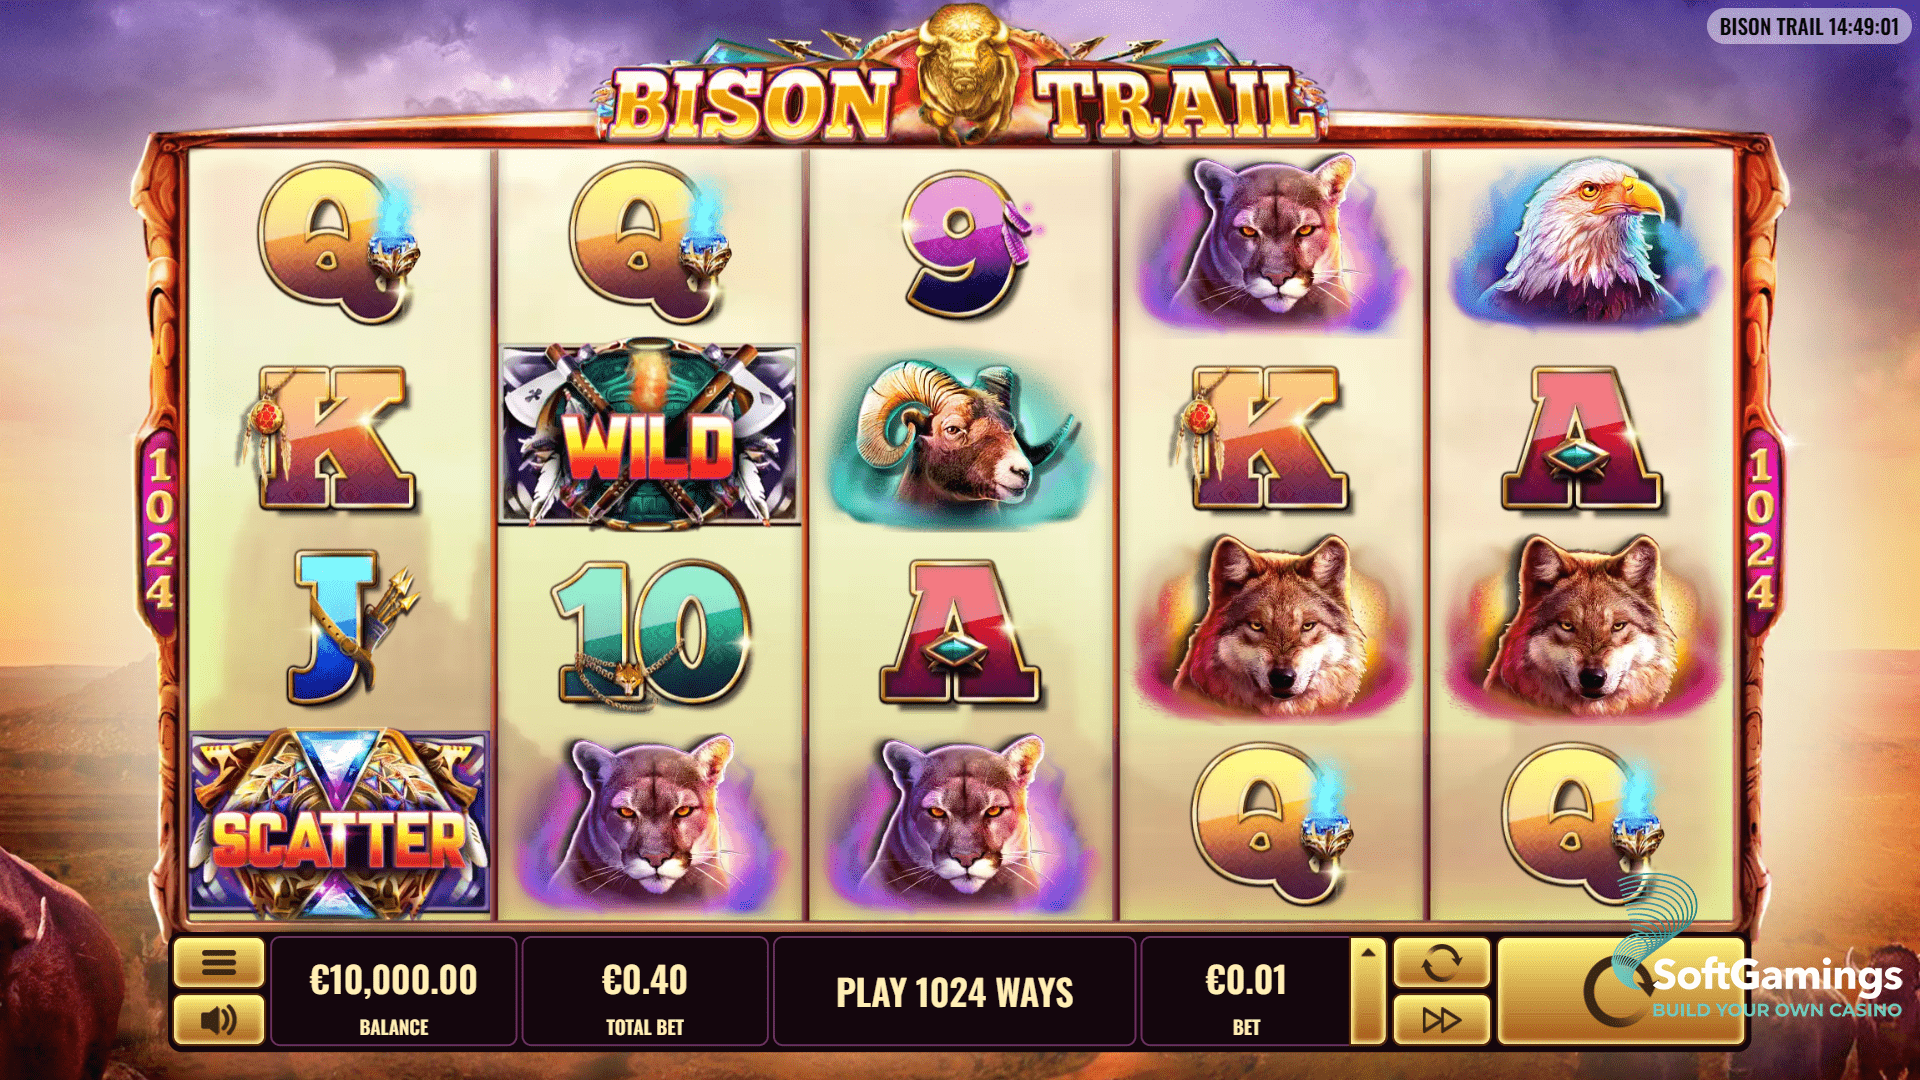 Bison Trail - Platipus Games catalogue | SoftGamings